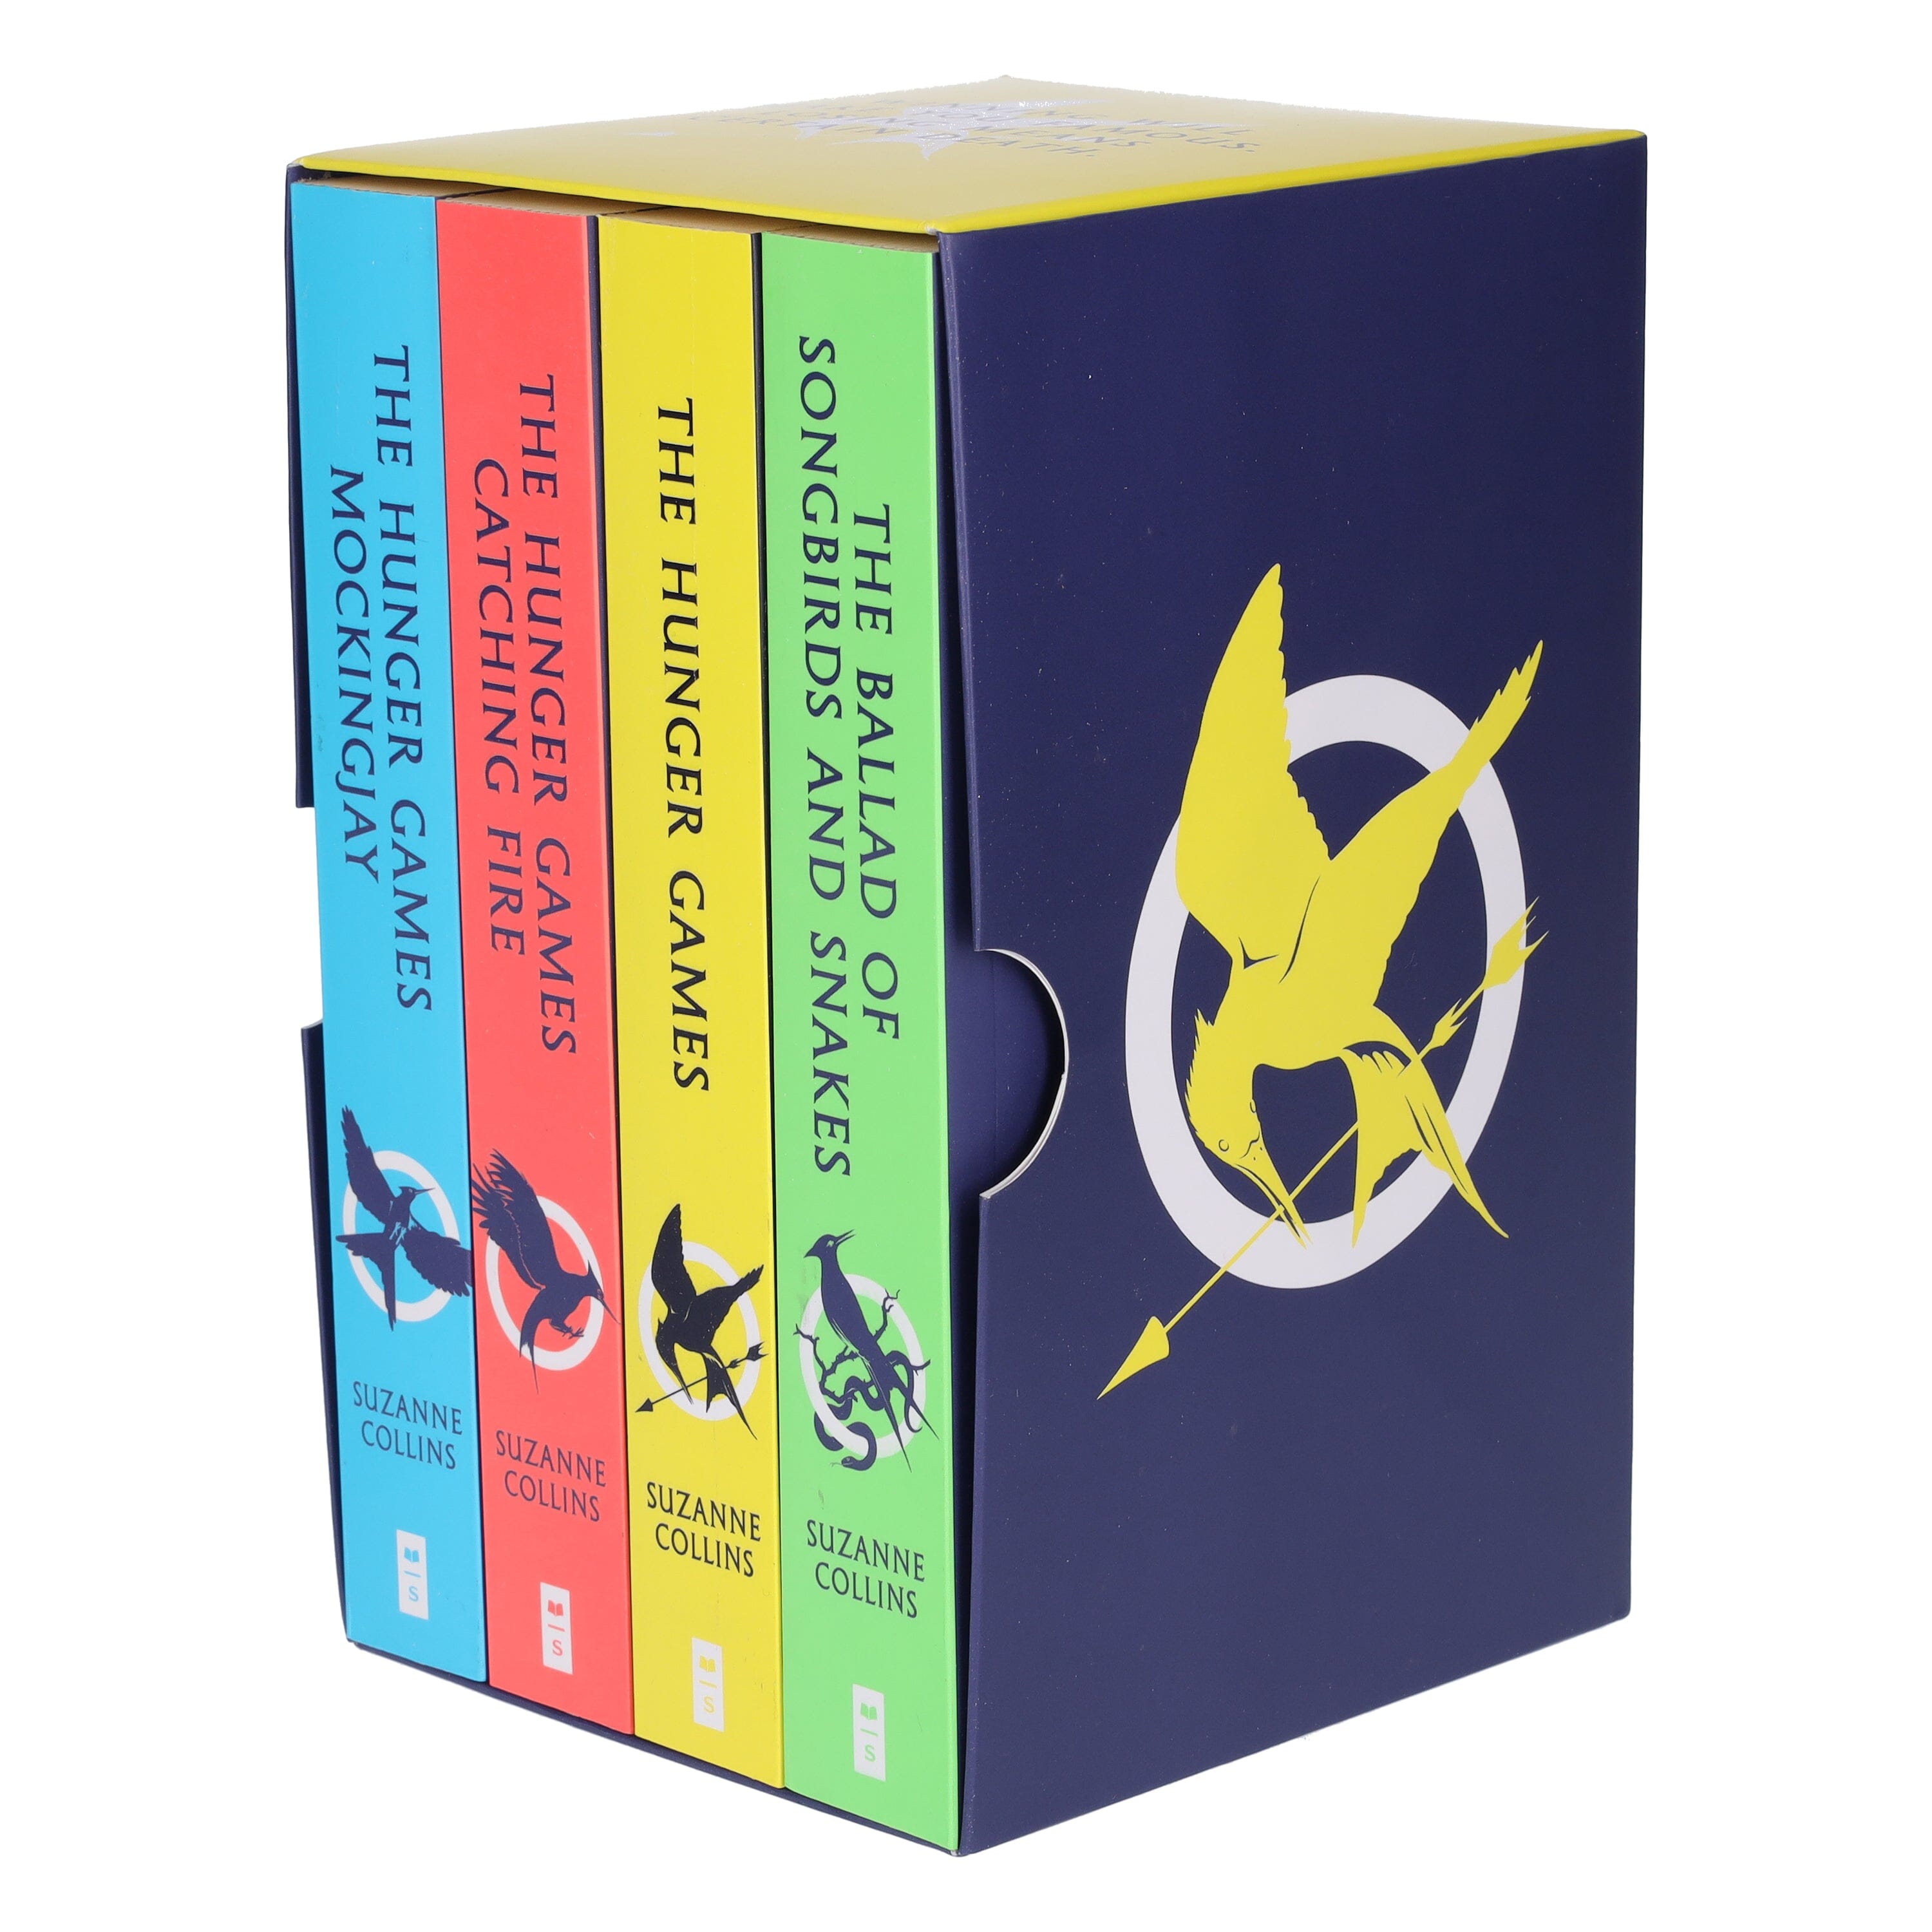 Deluxe Hunger Games Collection (4 book set) - Scholastic Shop